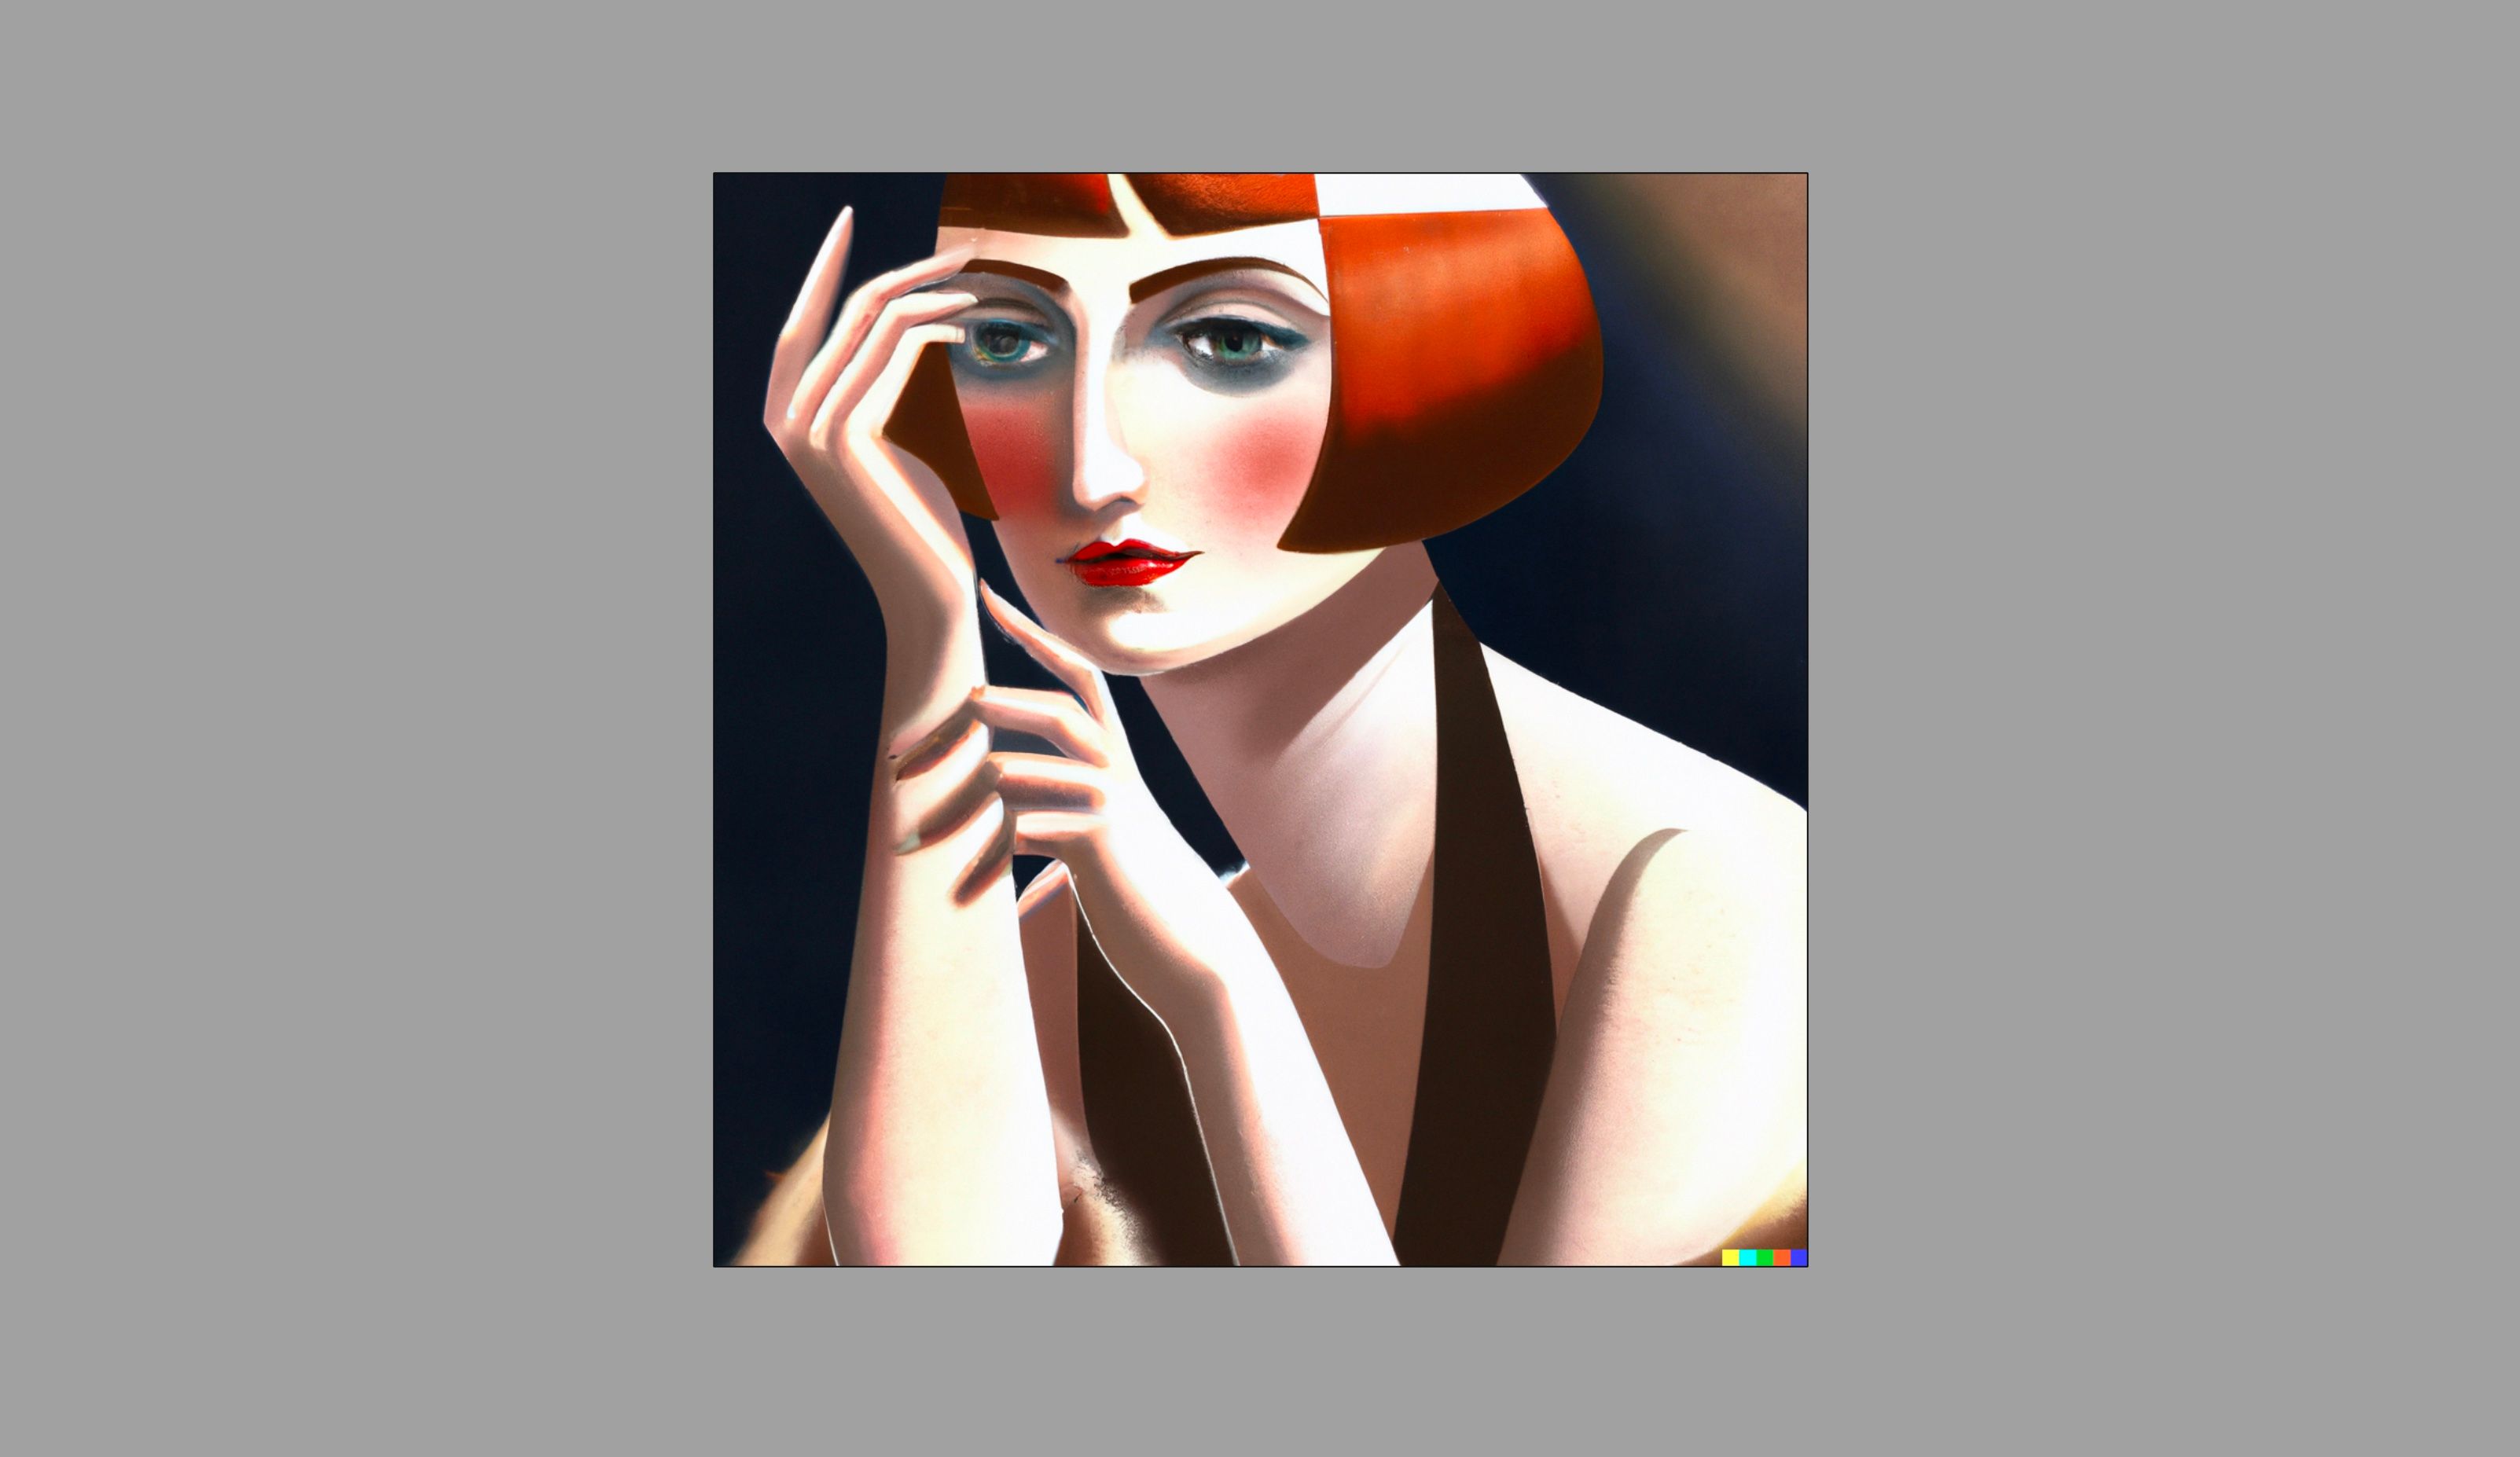 Portrait of a red hair woman in the style of Tamara de Lempicka